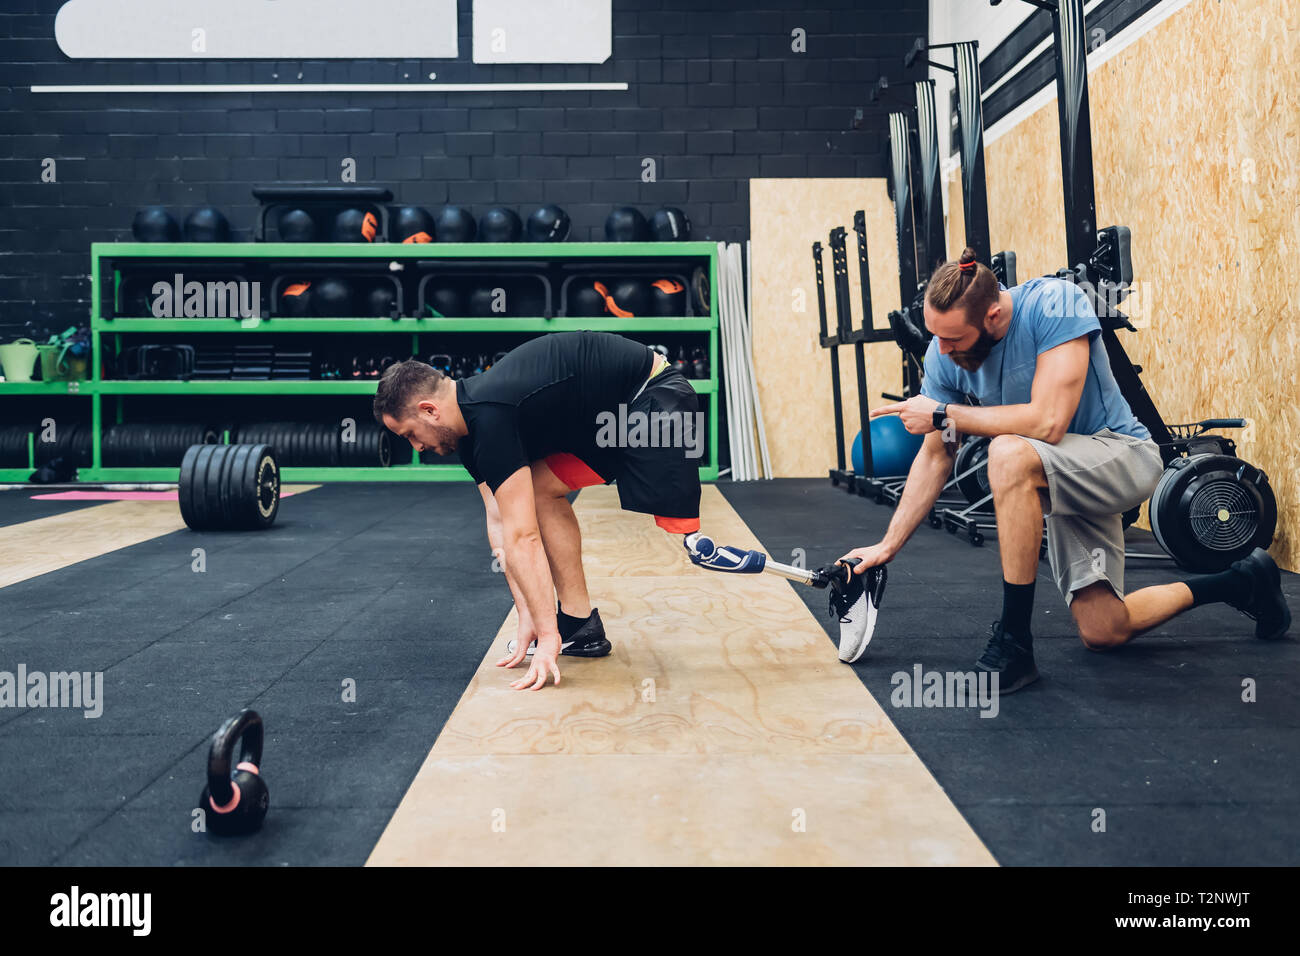 Man with prosthetic leg training in gym Stock Photo